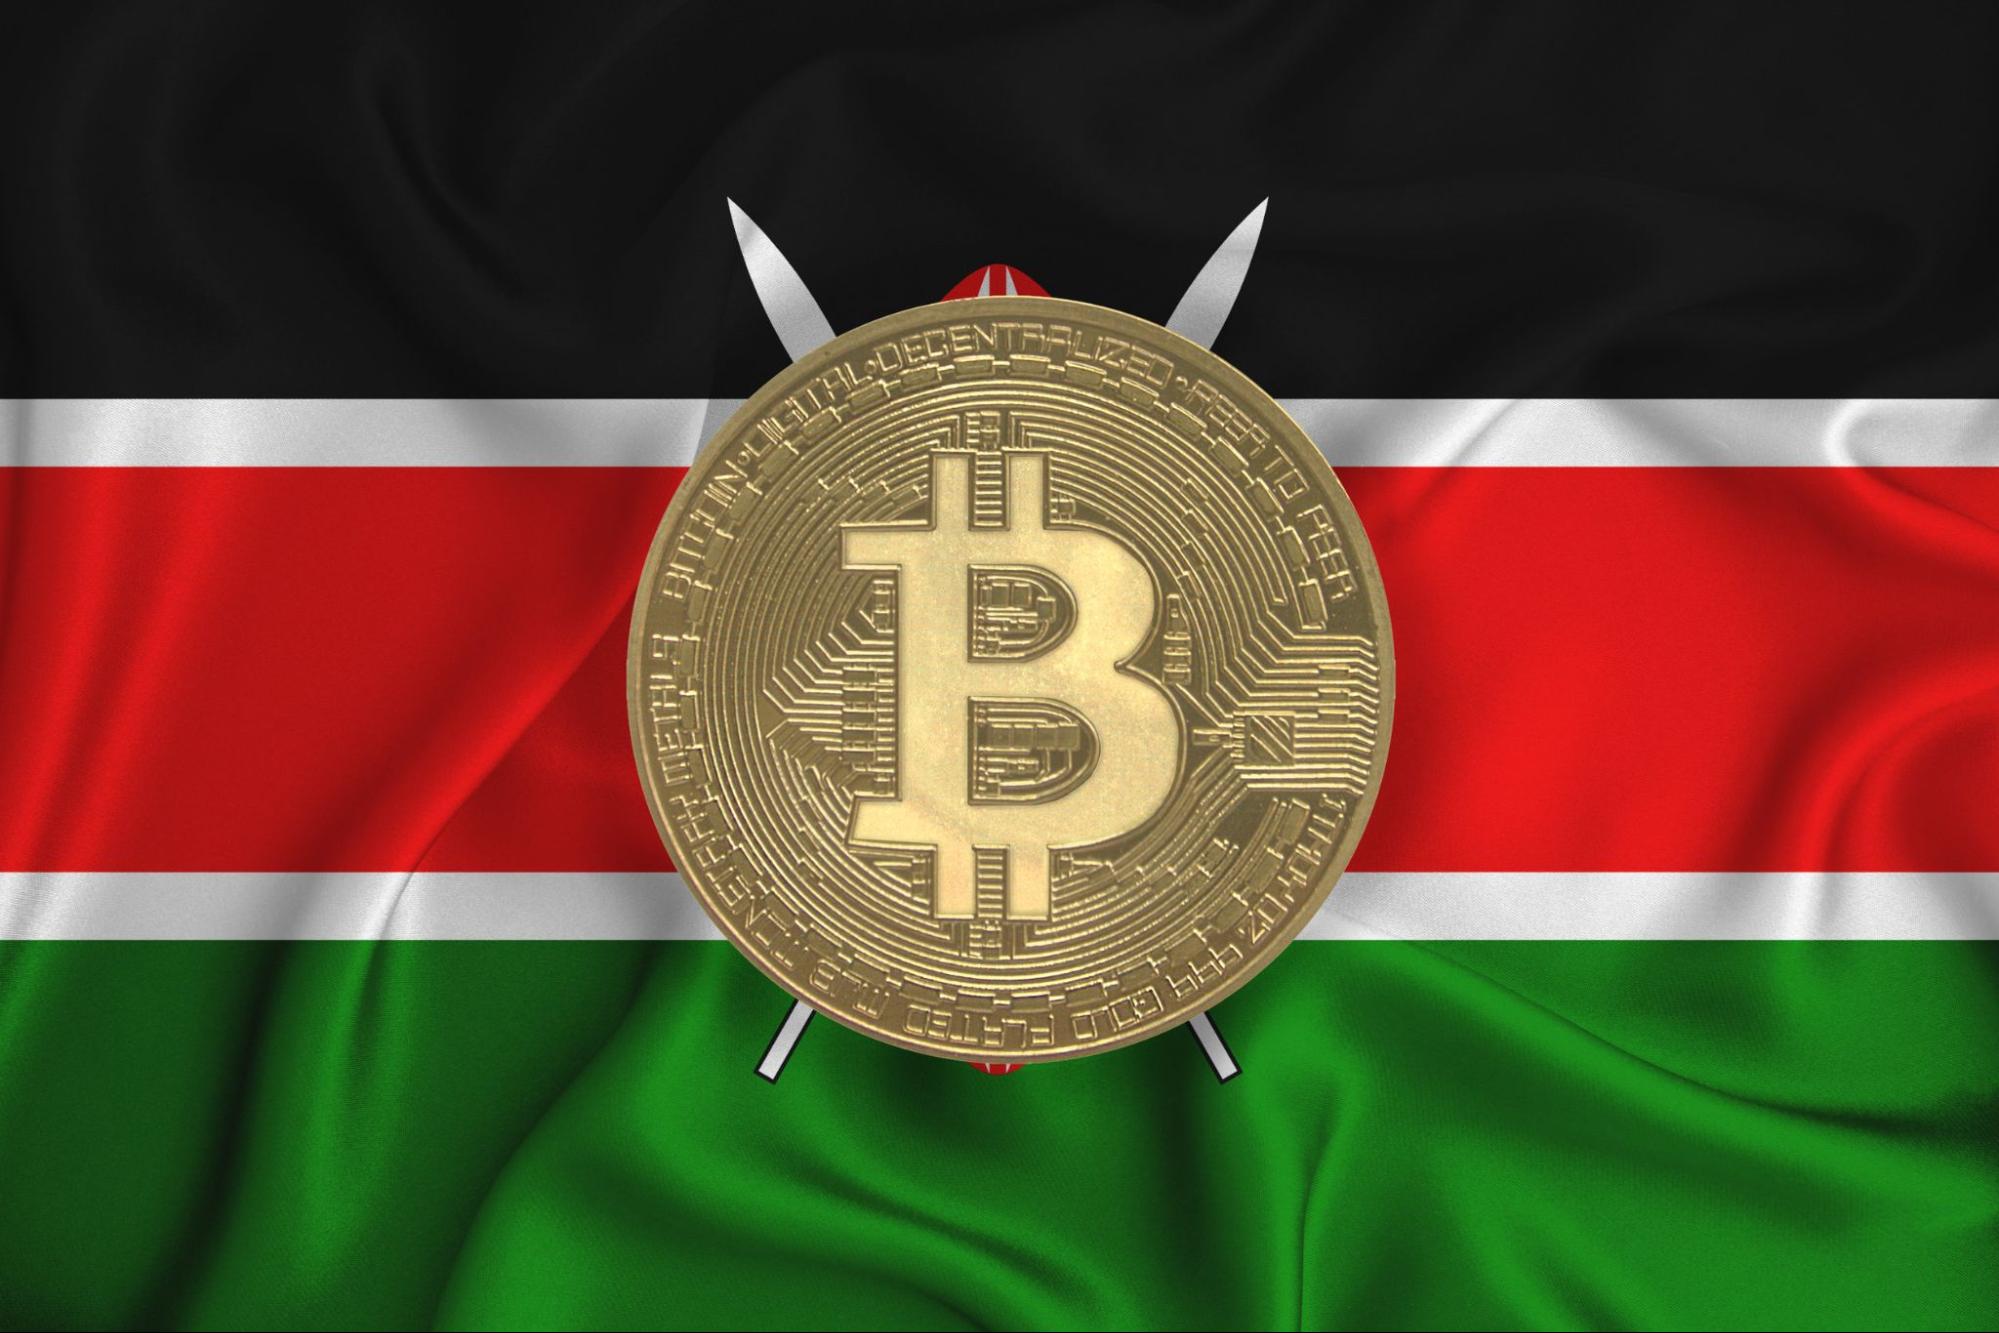 How to Buy Bitcoins in Kenya through Mpesa for only Ksh. 1,000 : Local Bitcoins User Guide